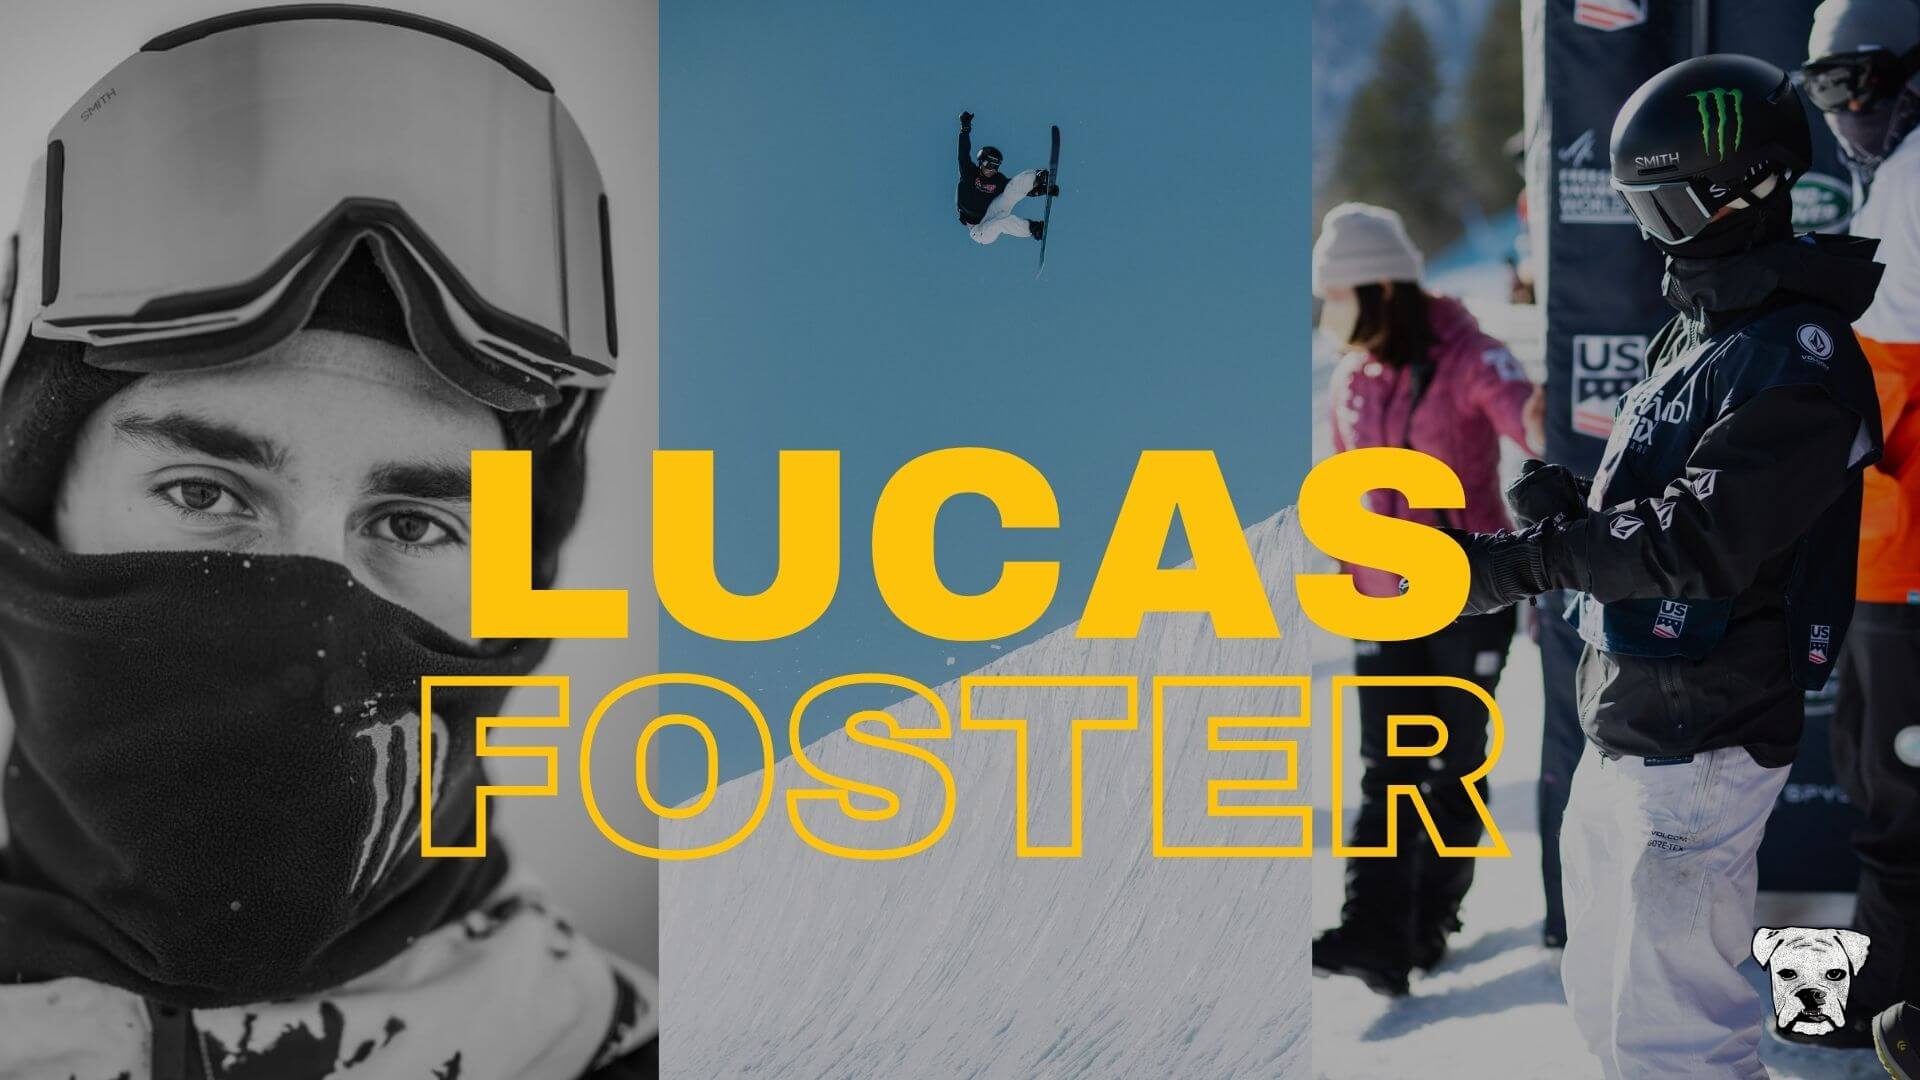 Lucas Foster of Team USA shares his journey from underdog to pro snowboarder